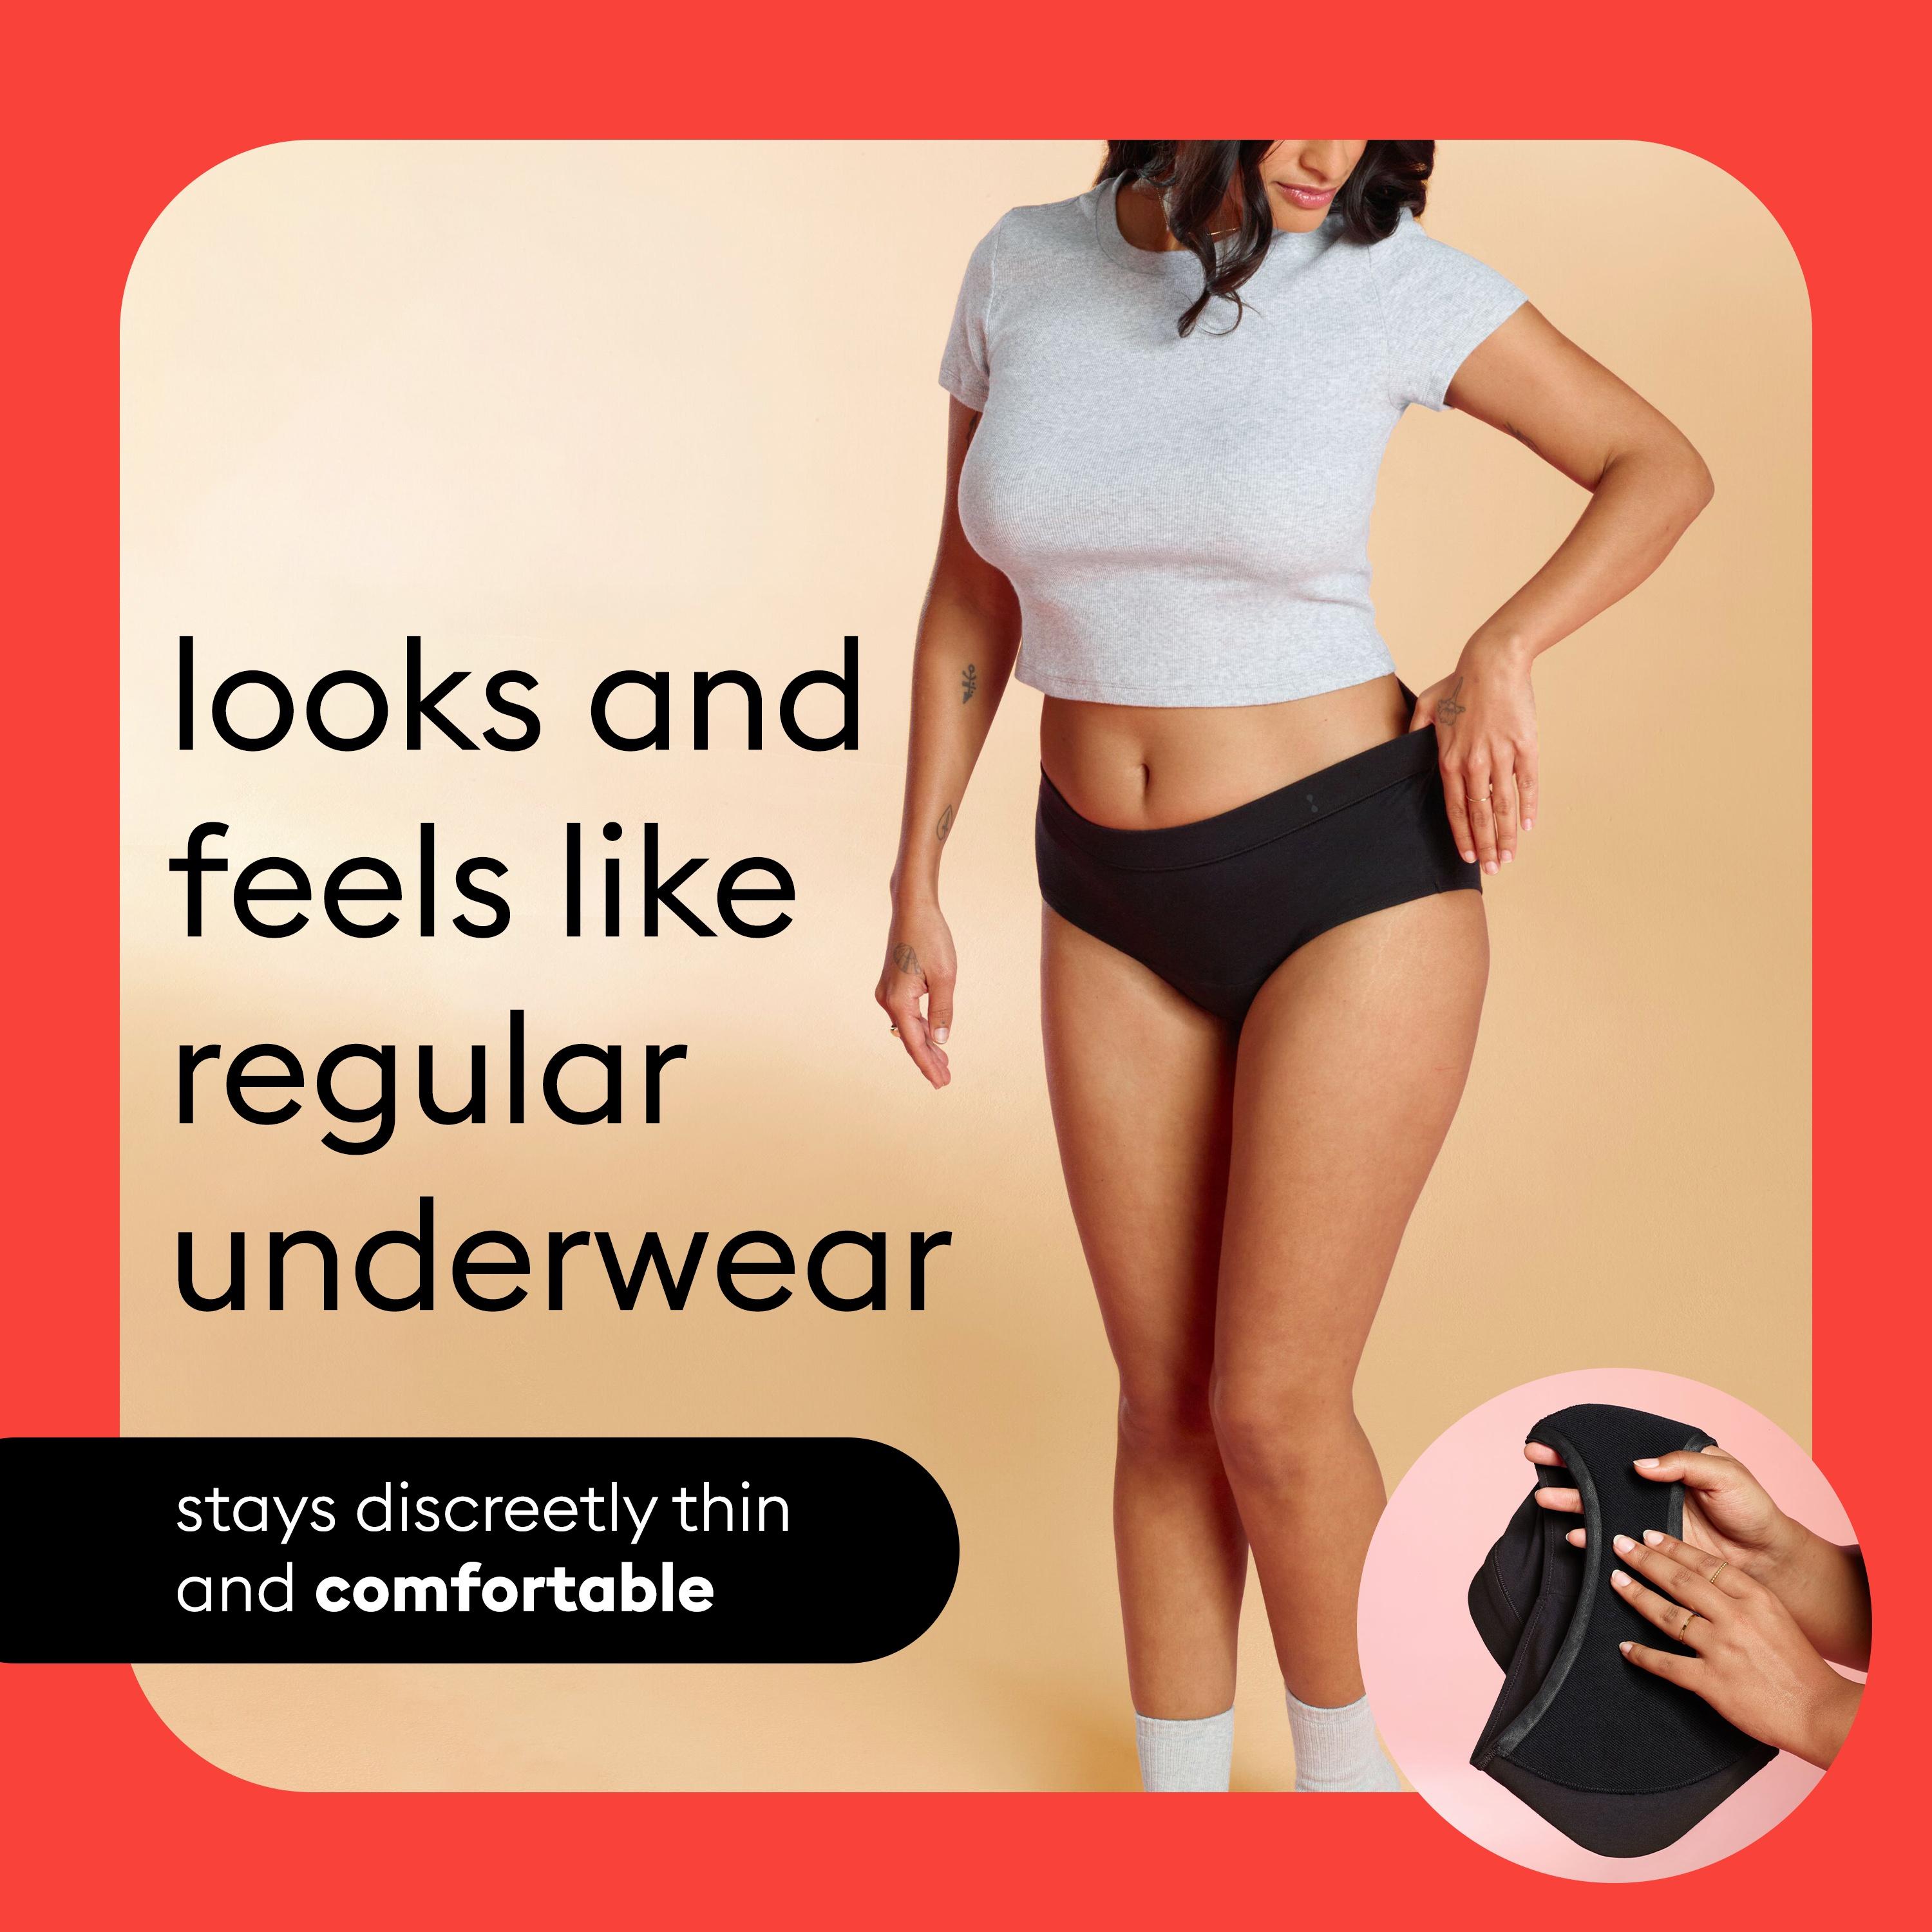 Thinx for All™ Women's Briefs Period Underwear, Moderate Absorbency, Black - image 3 of 5